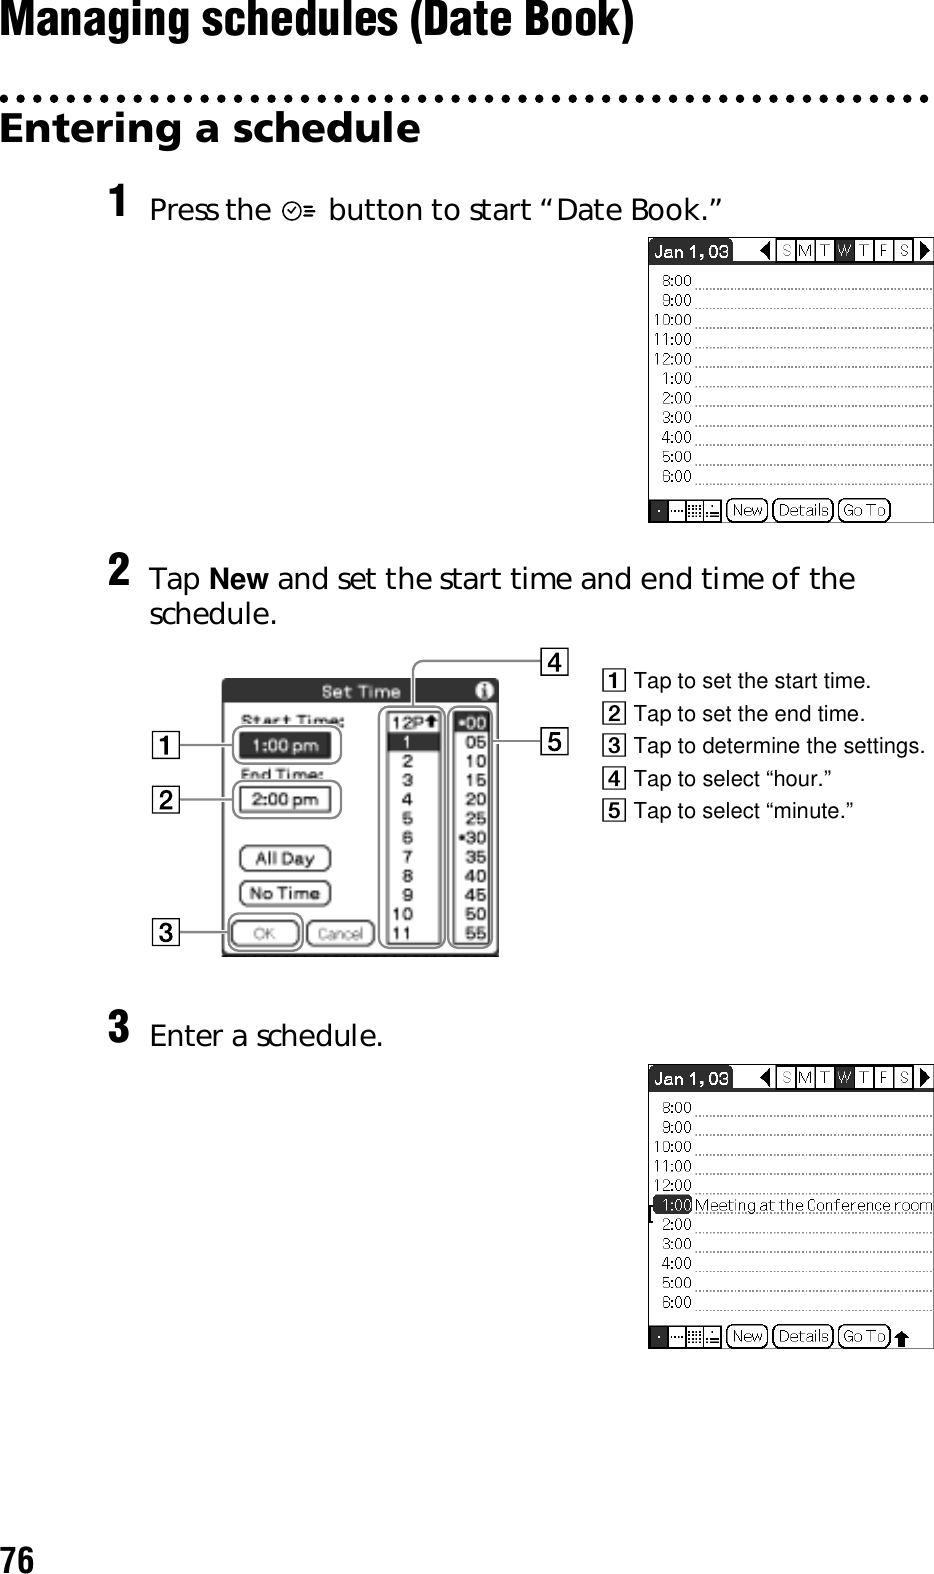 76Managing schedules (Date Book)Entering a schedule1Press the   button to start “Date Book.”2Tap New and set the start time and end time of the schedule.3Enter a schedule.1 Tap to set the start time.2 Tap to set the end time.3 Tap to determine the settings.4 Tap to select “hour.”5 Tap to select “minute.”